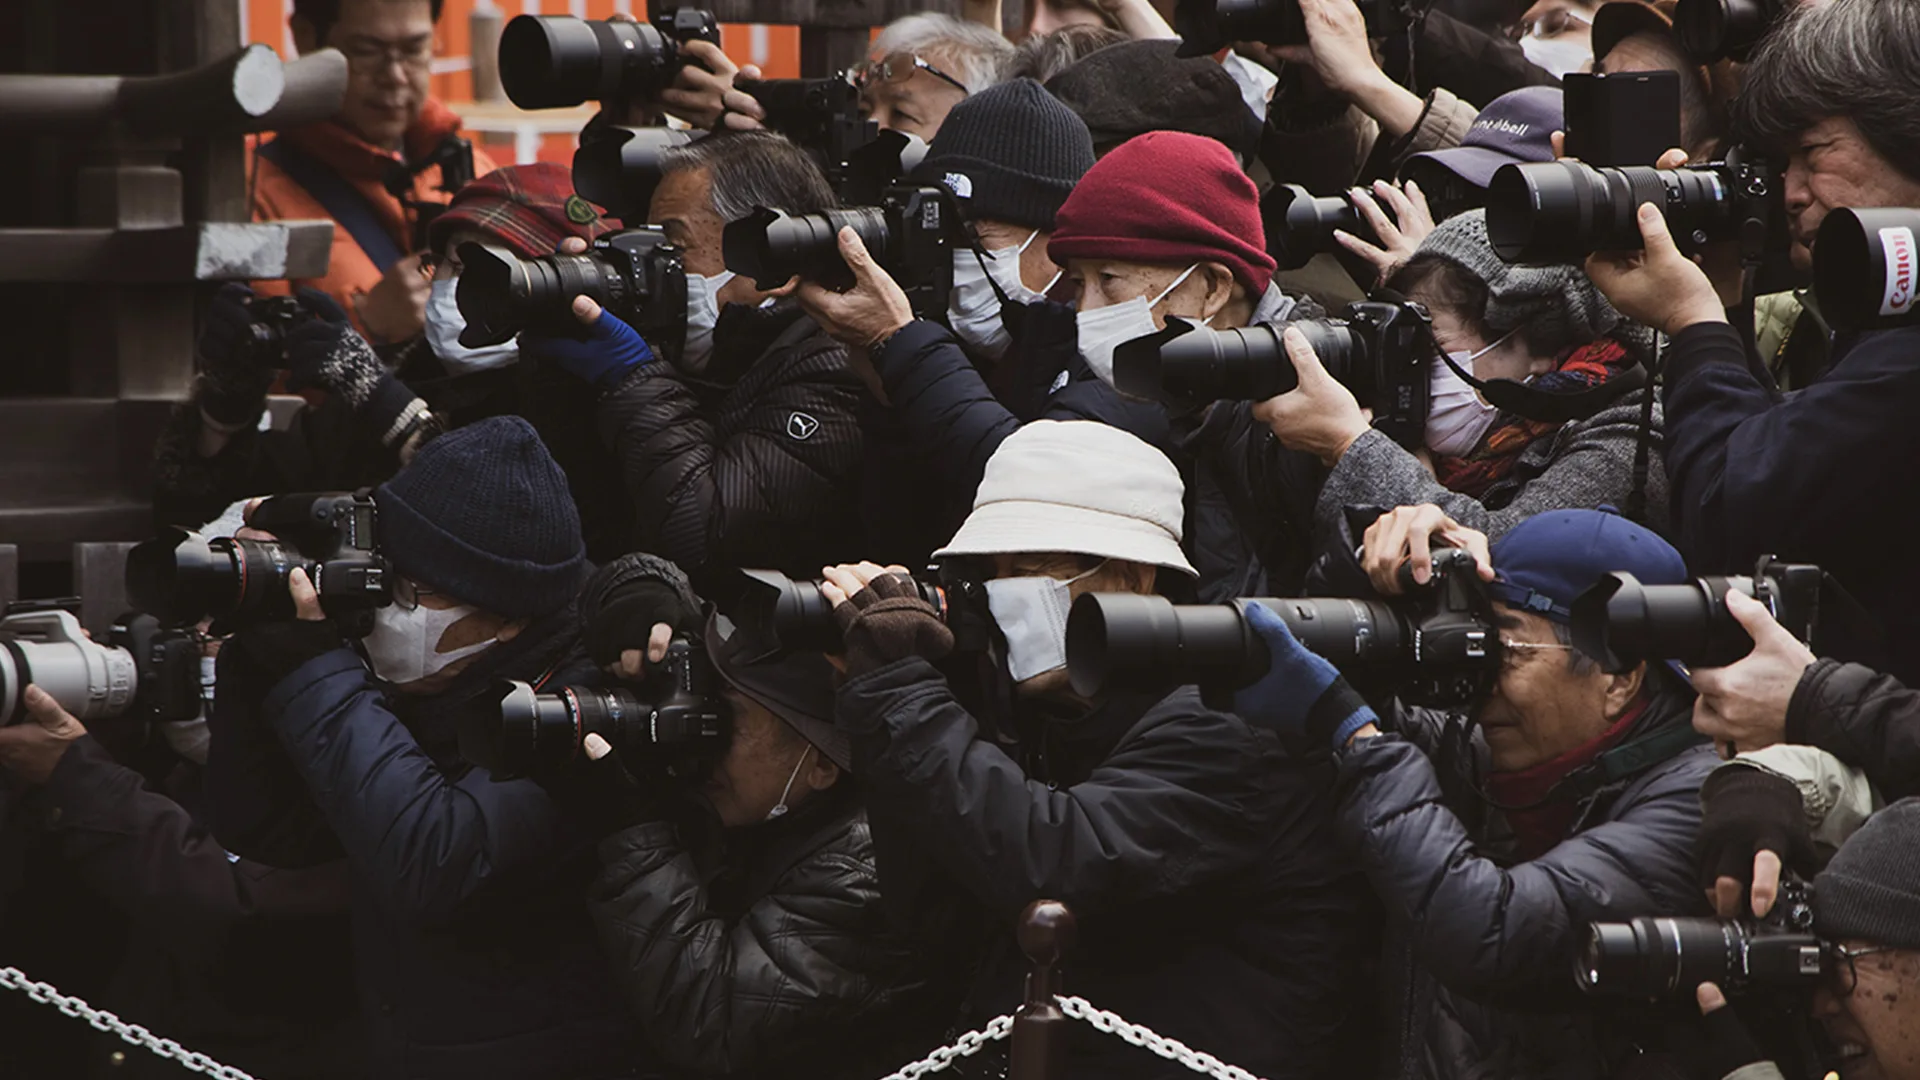 A group of paparazzi